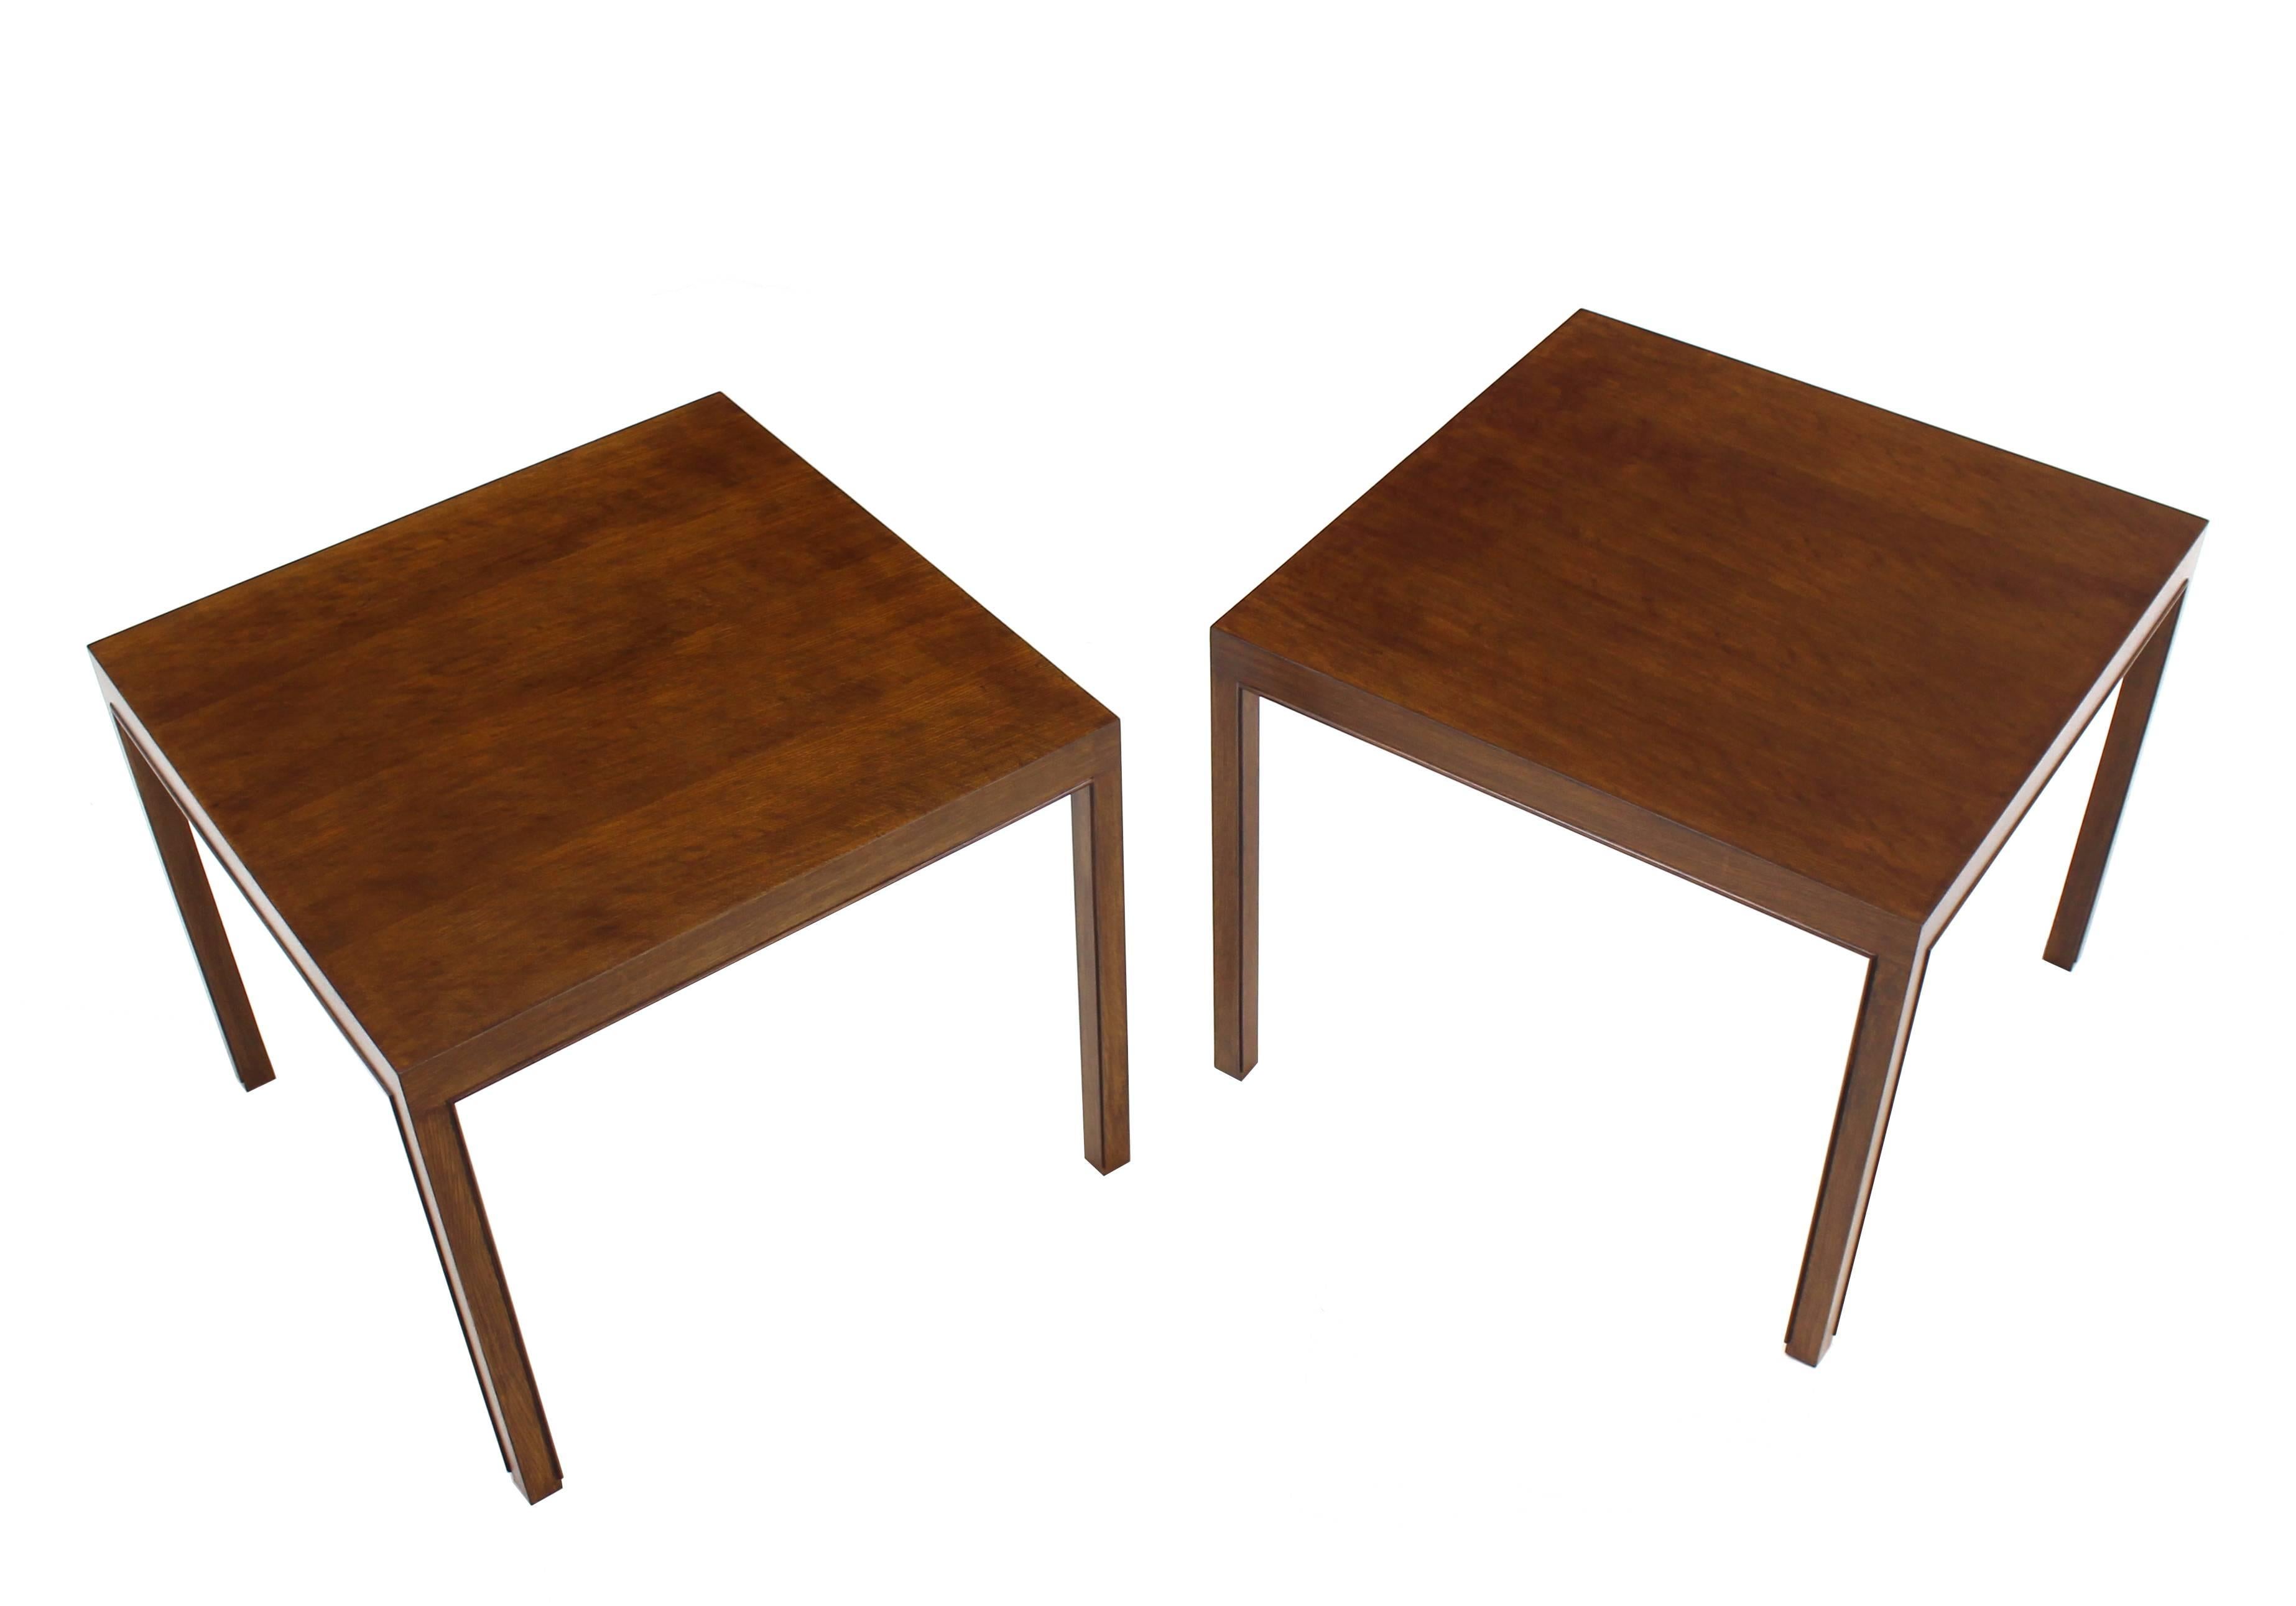 Pair of Large Square Lamp End Tables by Dunbar In Excellent Condition For Sale In Rockaway, NJ